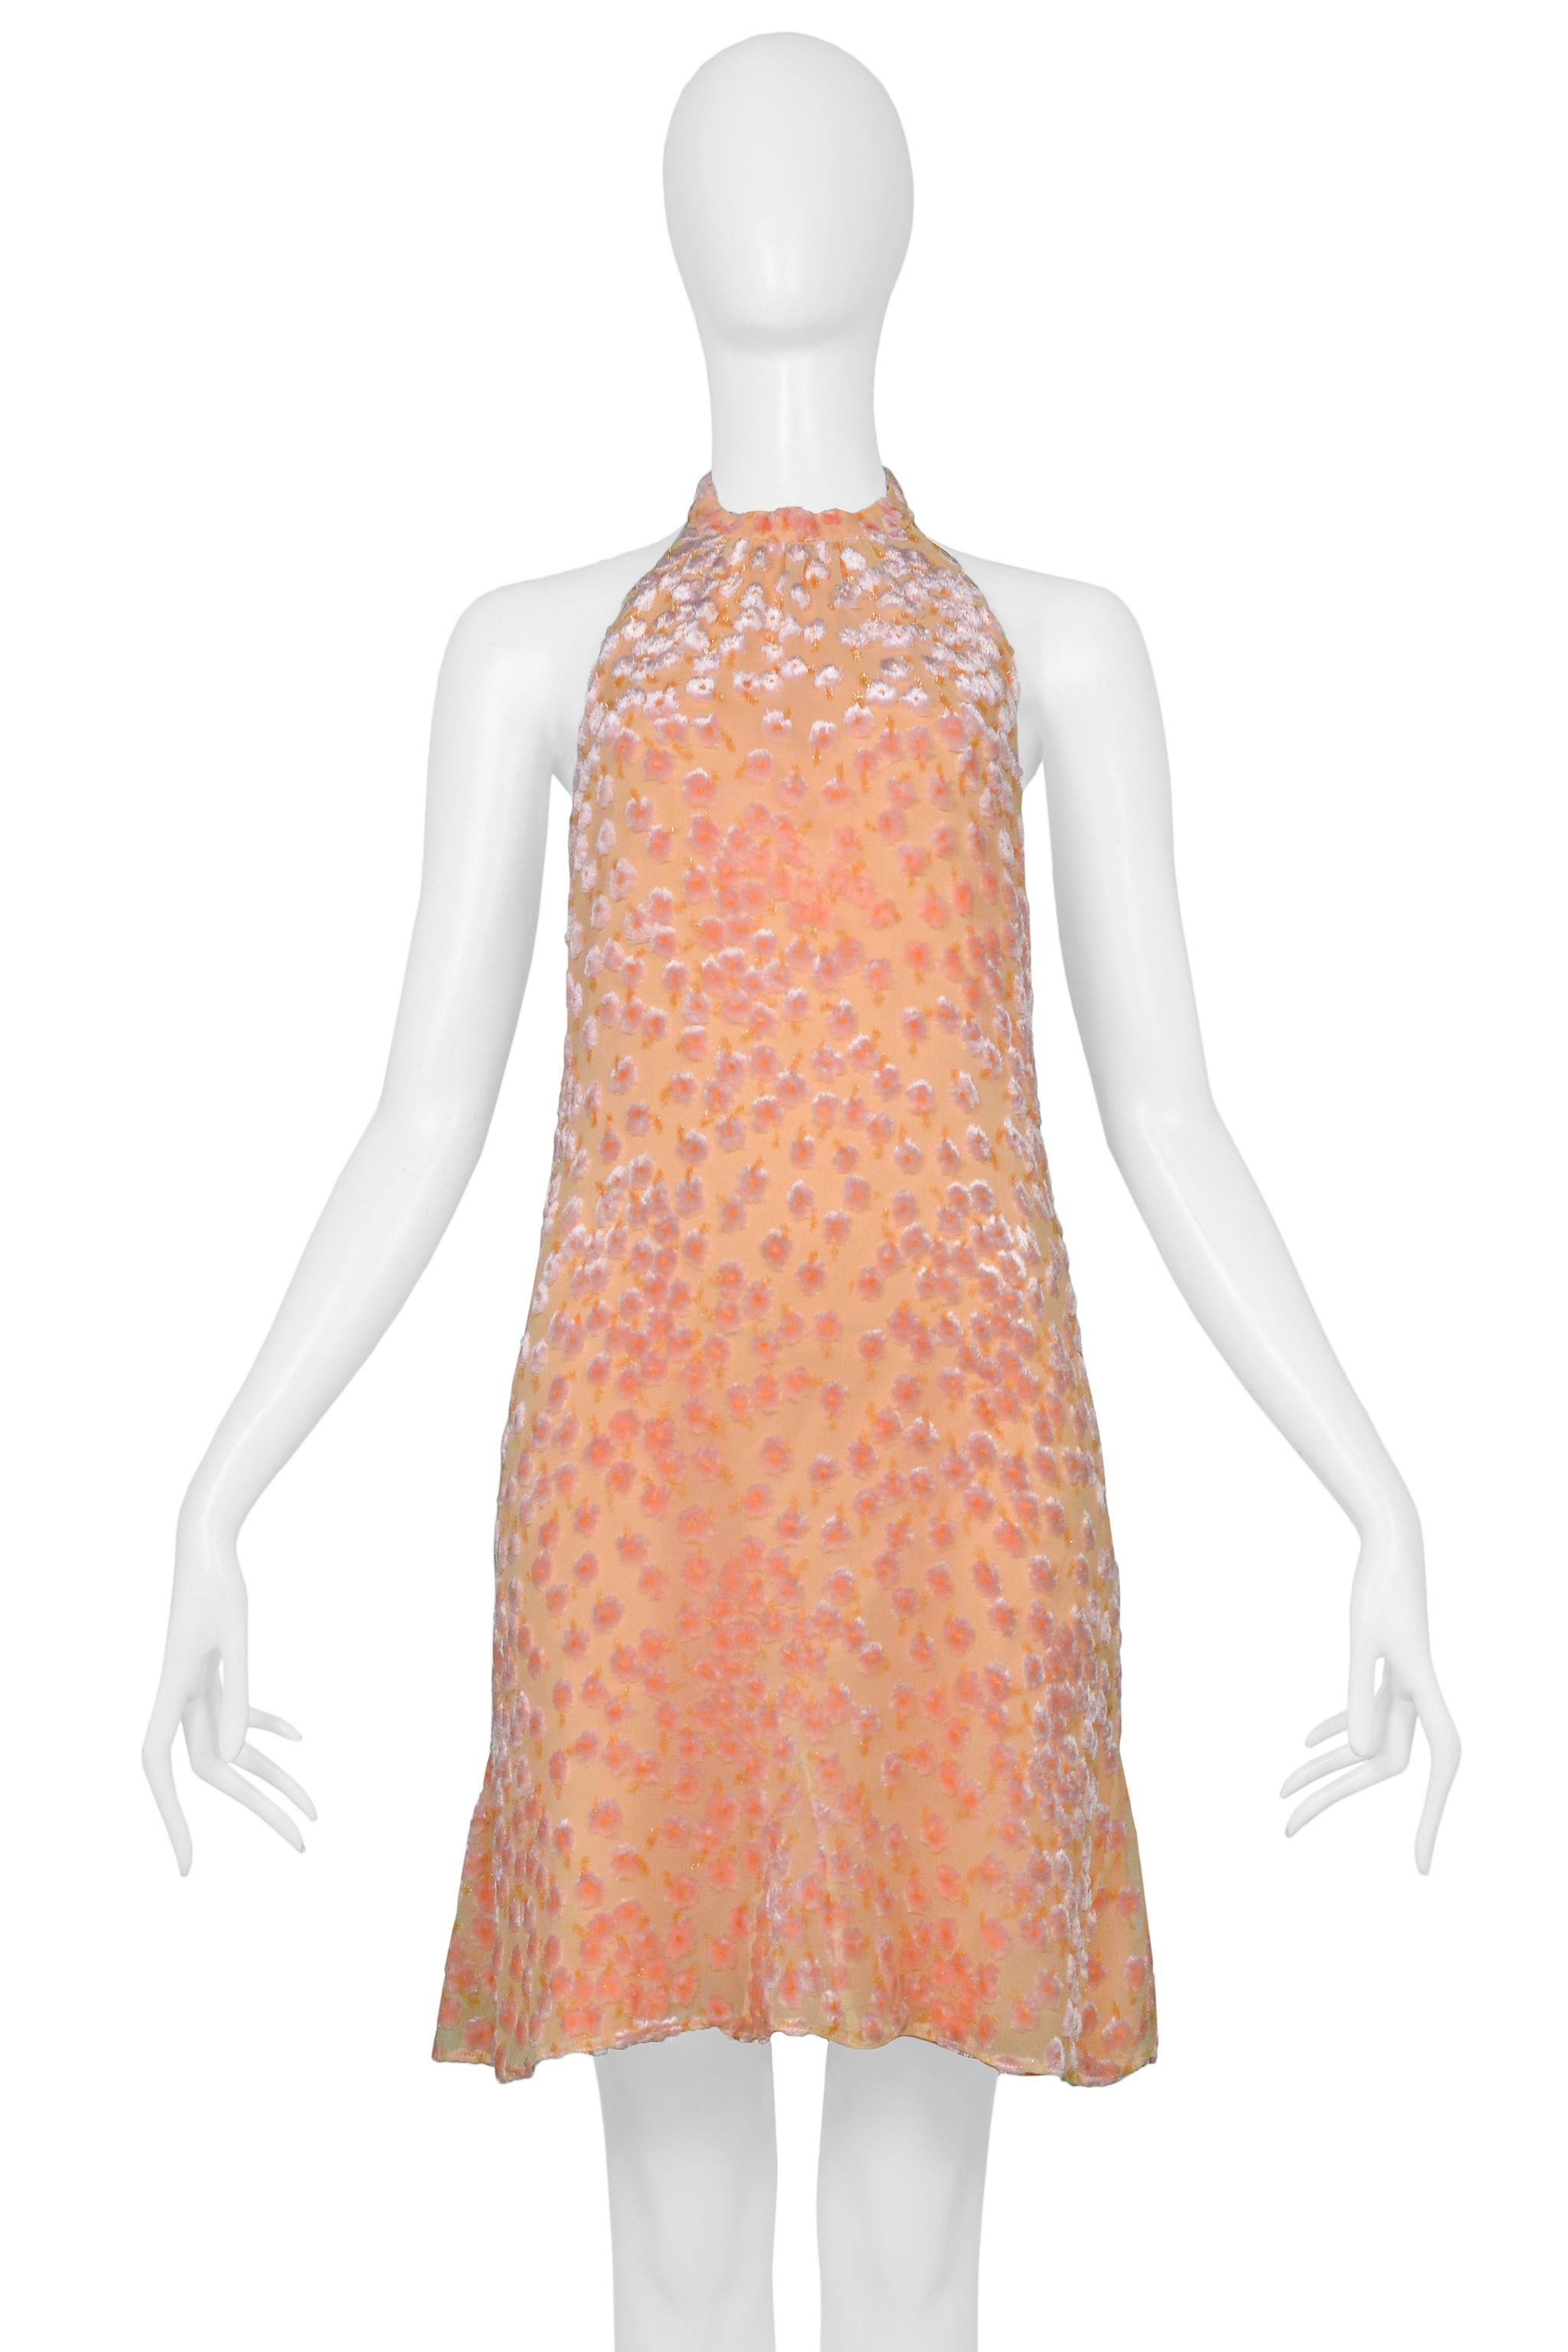 Resurrection Vintage is excited to offer a vintage Chanel by Karl Lagerfeld peach silk halter dress featuring iridescent cut velvet floral flowers, open back with cowl draping, button back and mini length .  

Chanel, Paris
Size 38
Fabric Silk and